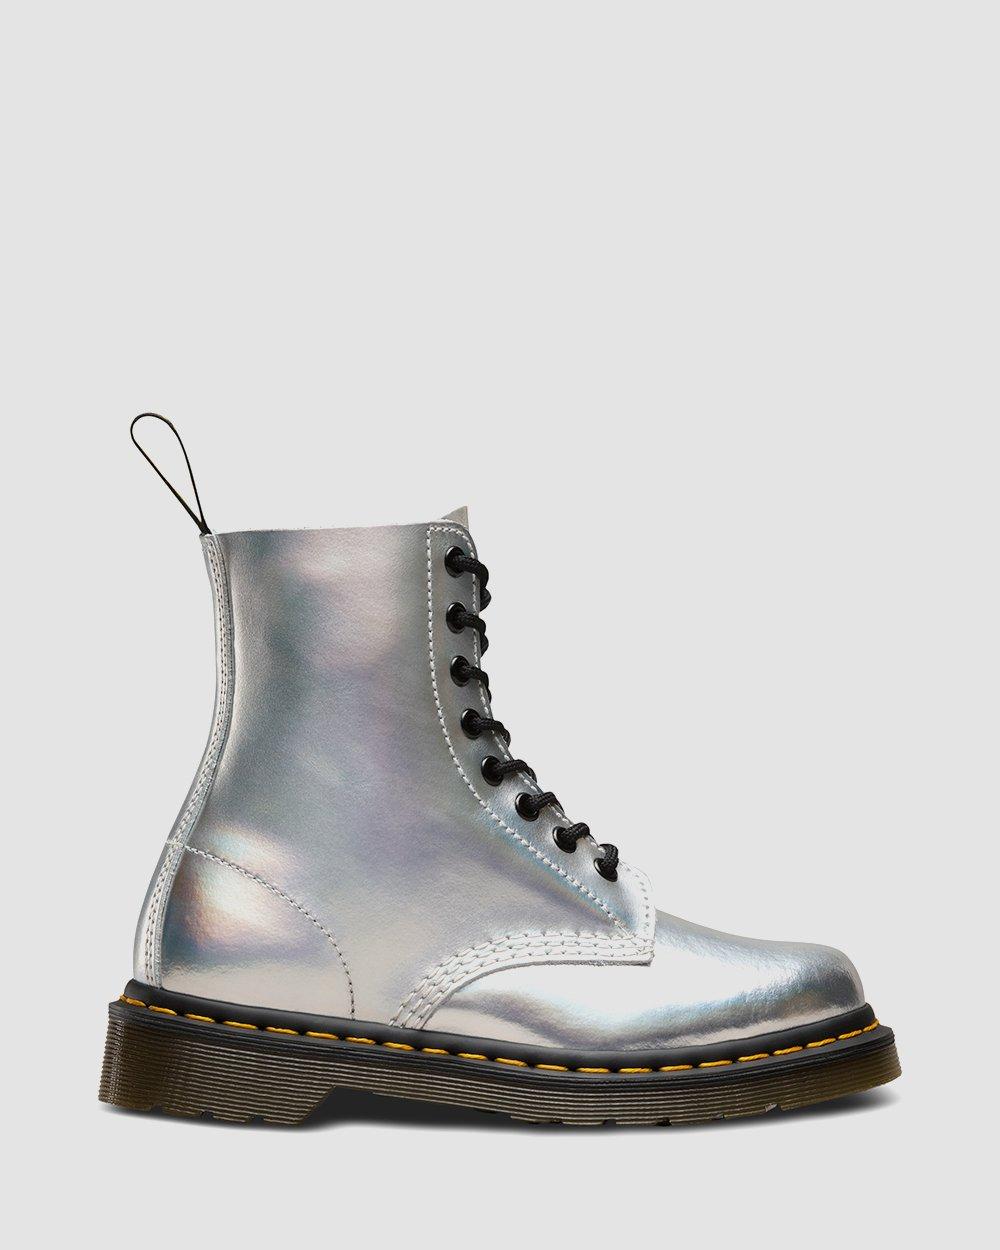 Pascal Iced | Dr. Martens